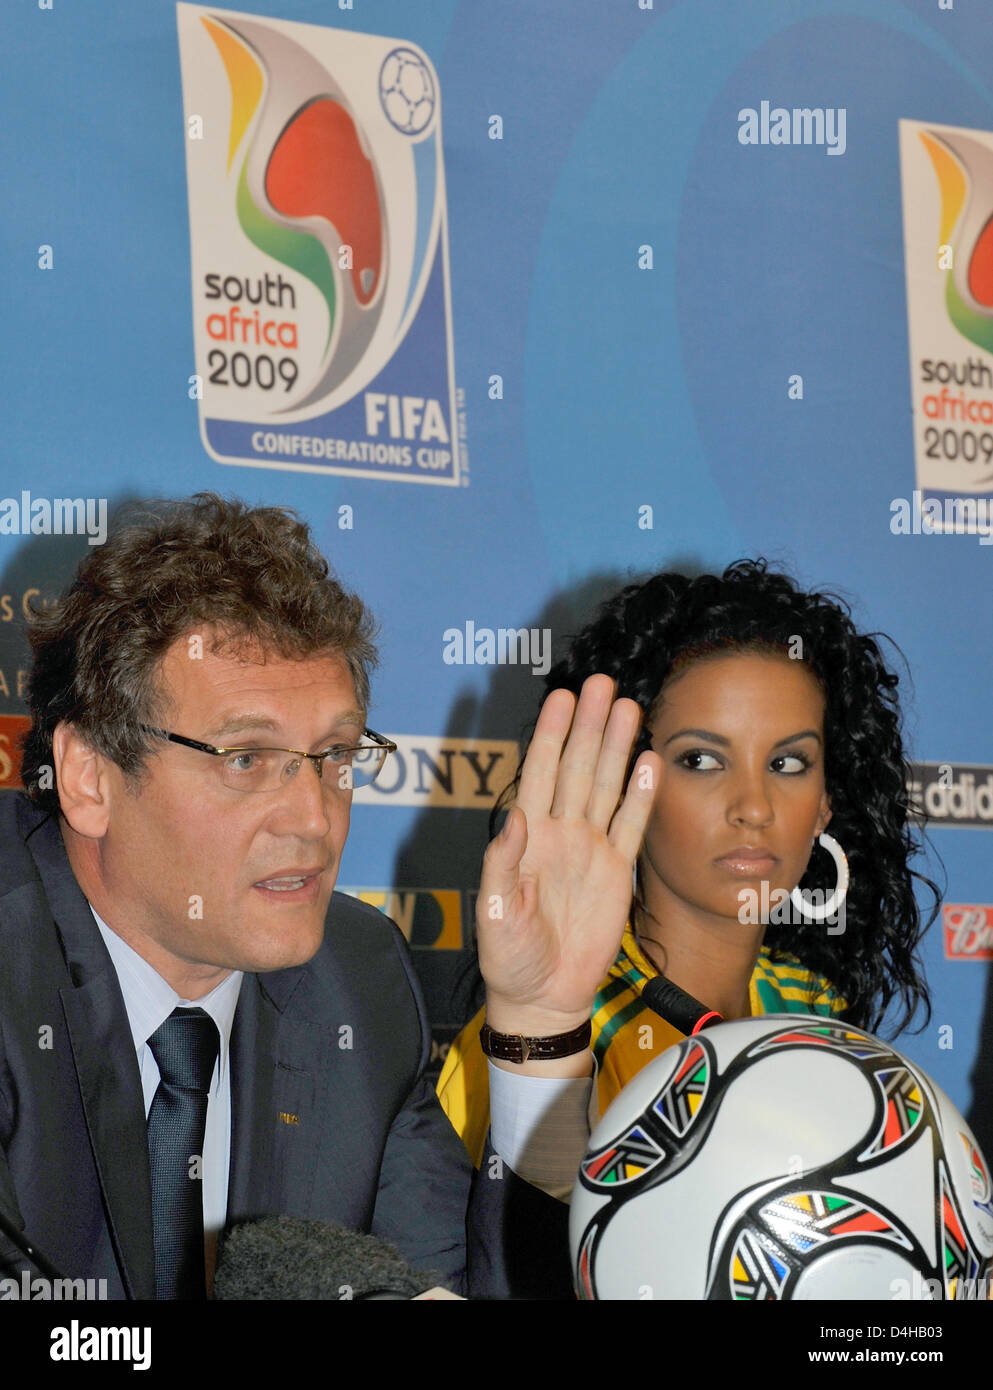 FIFA Secretary General Jerome Valcke (L) and Miss South Africa Tansey Coetzee participate in a press conference in Johannesburg, South Africa, 21 November 2008. One day prior to the drawing of groups for the Confed Cup, Valcke praised World Cup host country South Africa. Photo: Gero Breloer Stock Photo